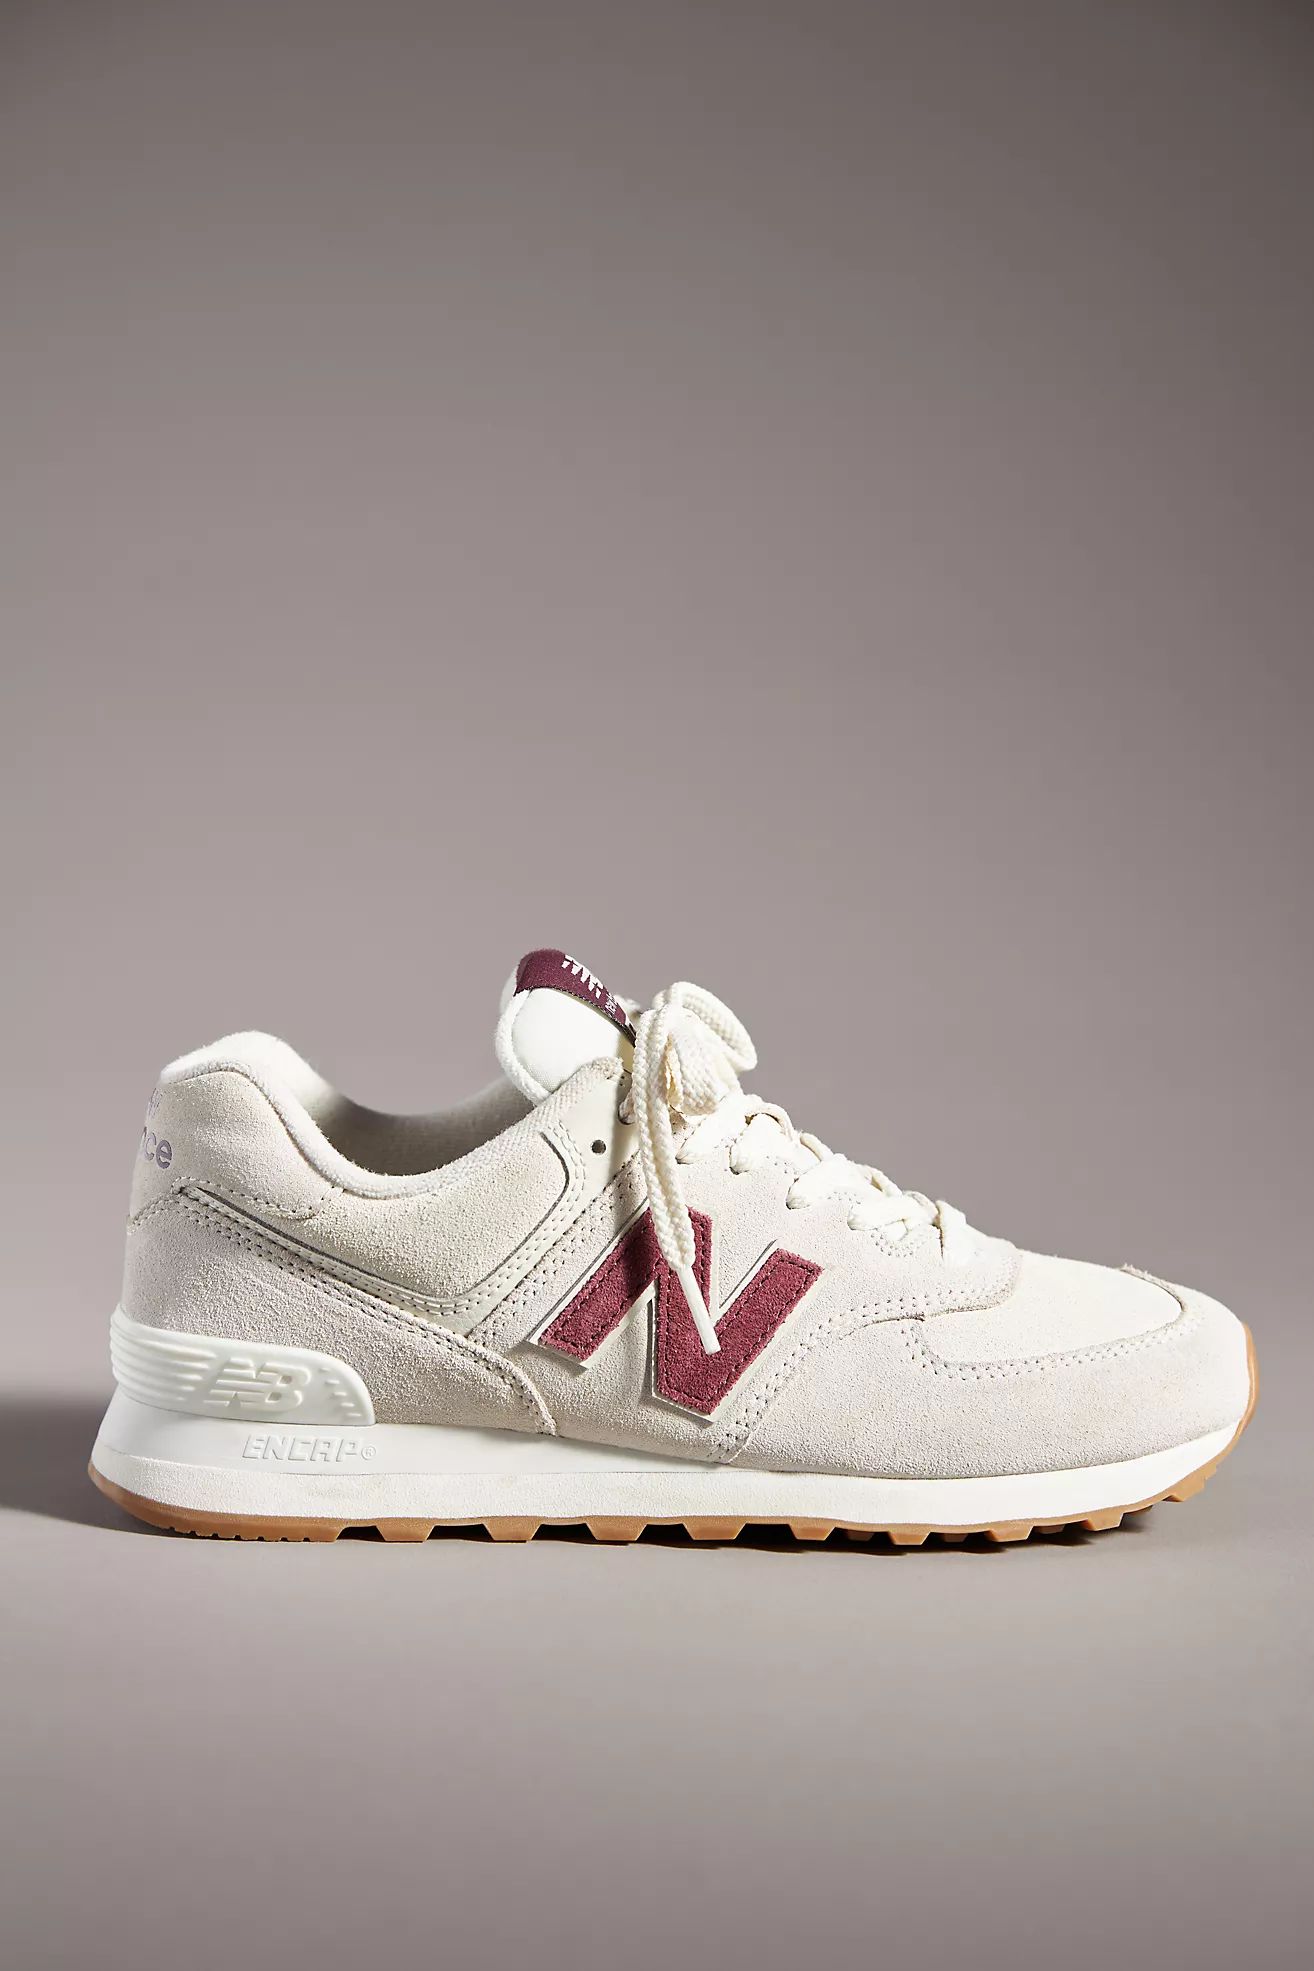 New Balance 574 Sneakers | Anthropologie (US)